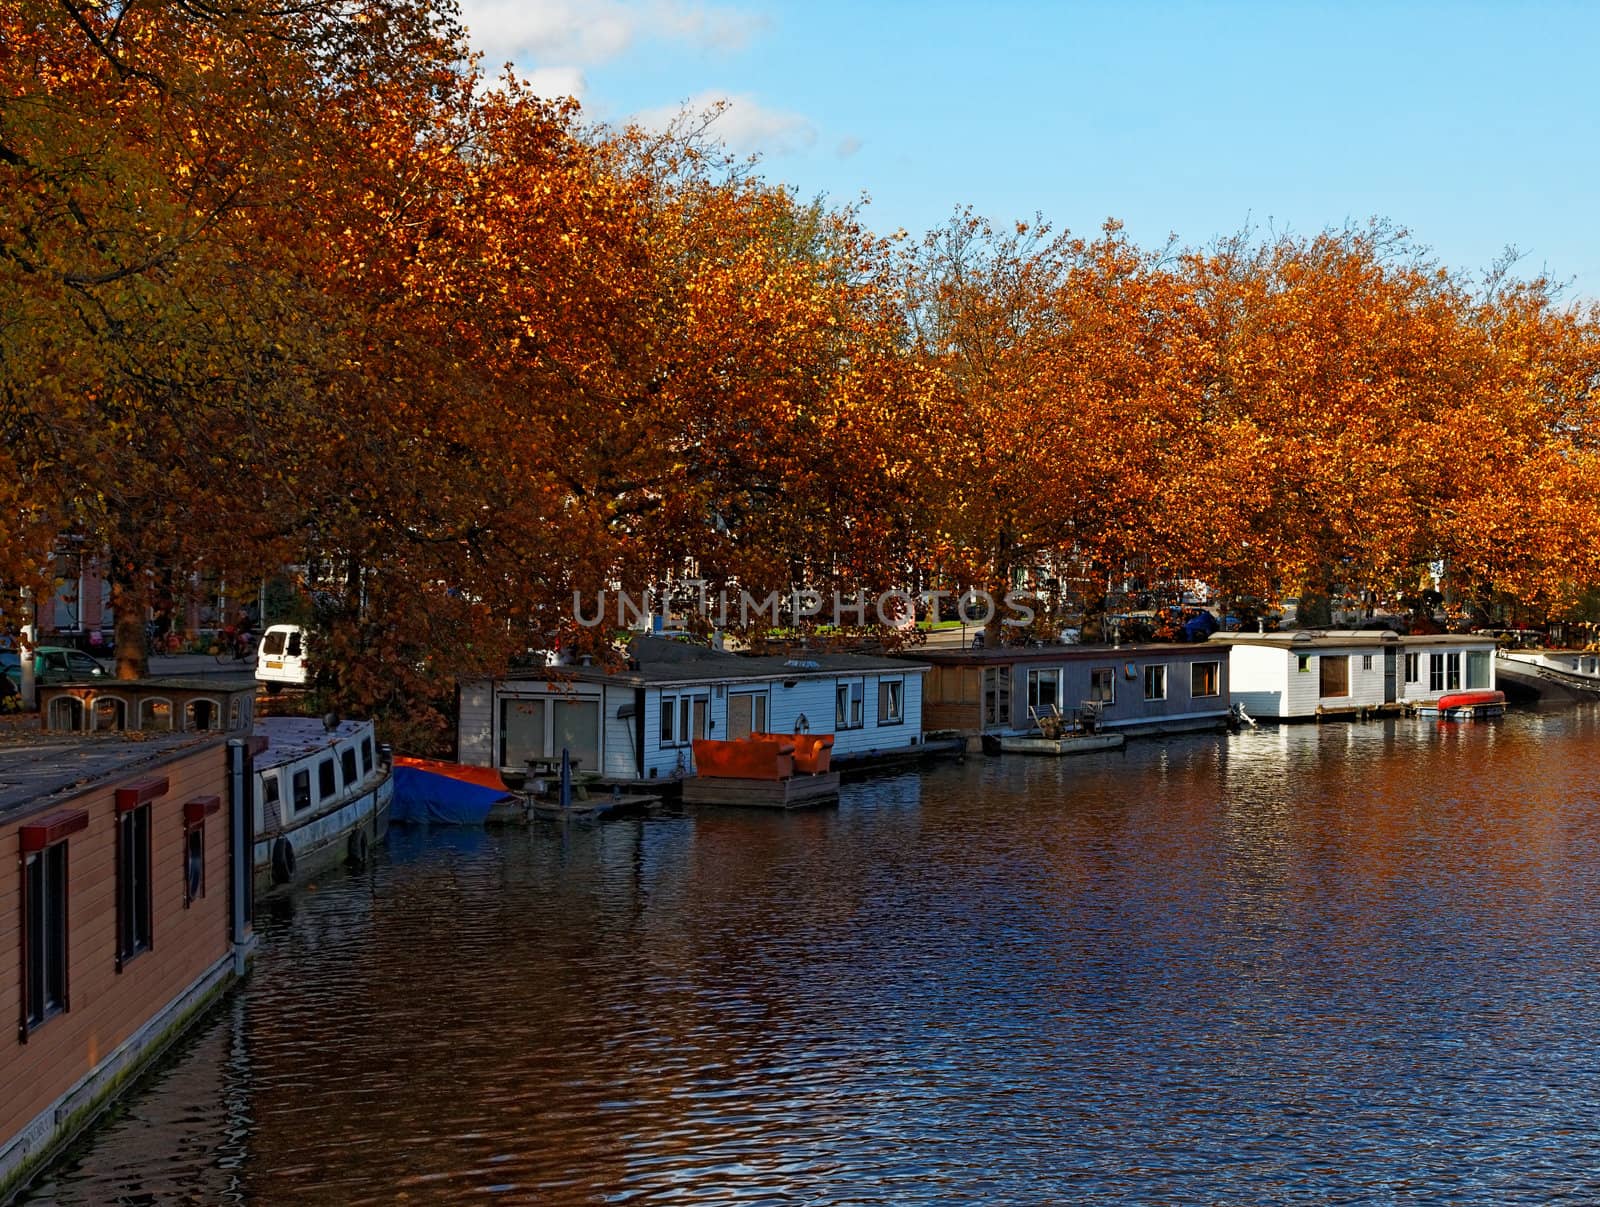 Autumn image of a typical canal with floating houses in Amsterdam.